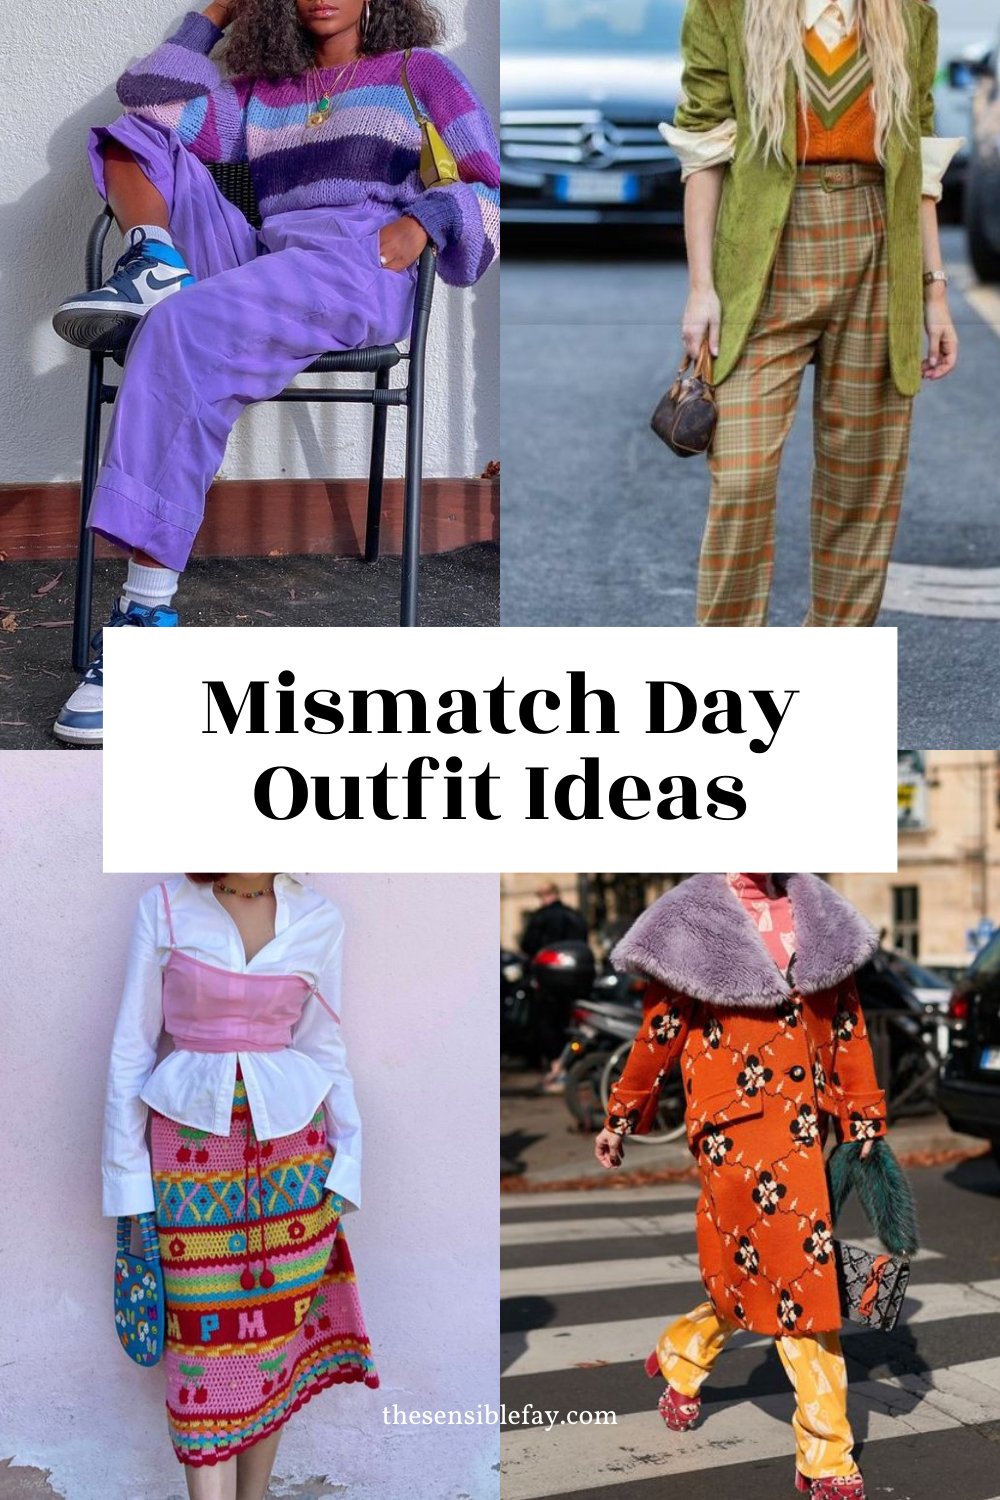 Mismatch Day Ideas (Plus Tips For Styling Mismatched Outfits